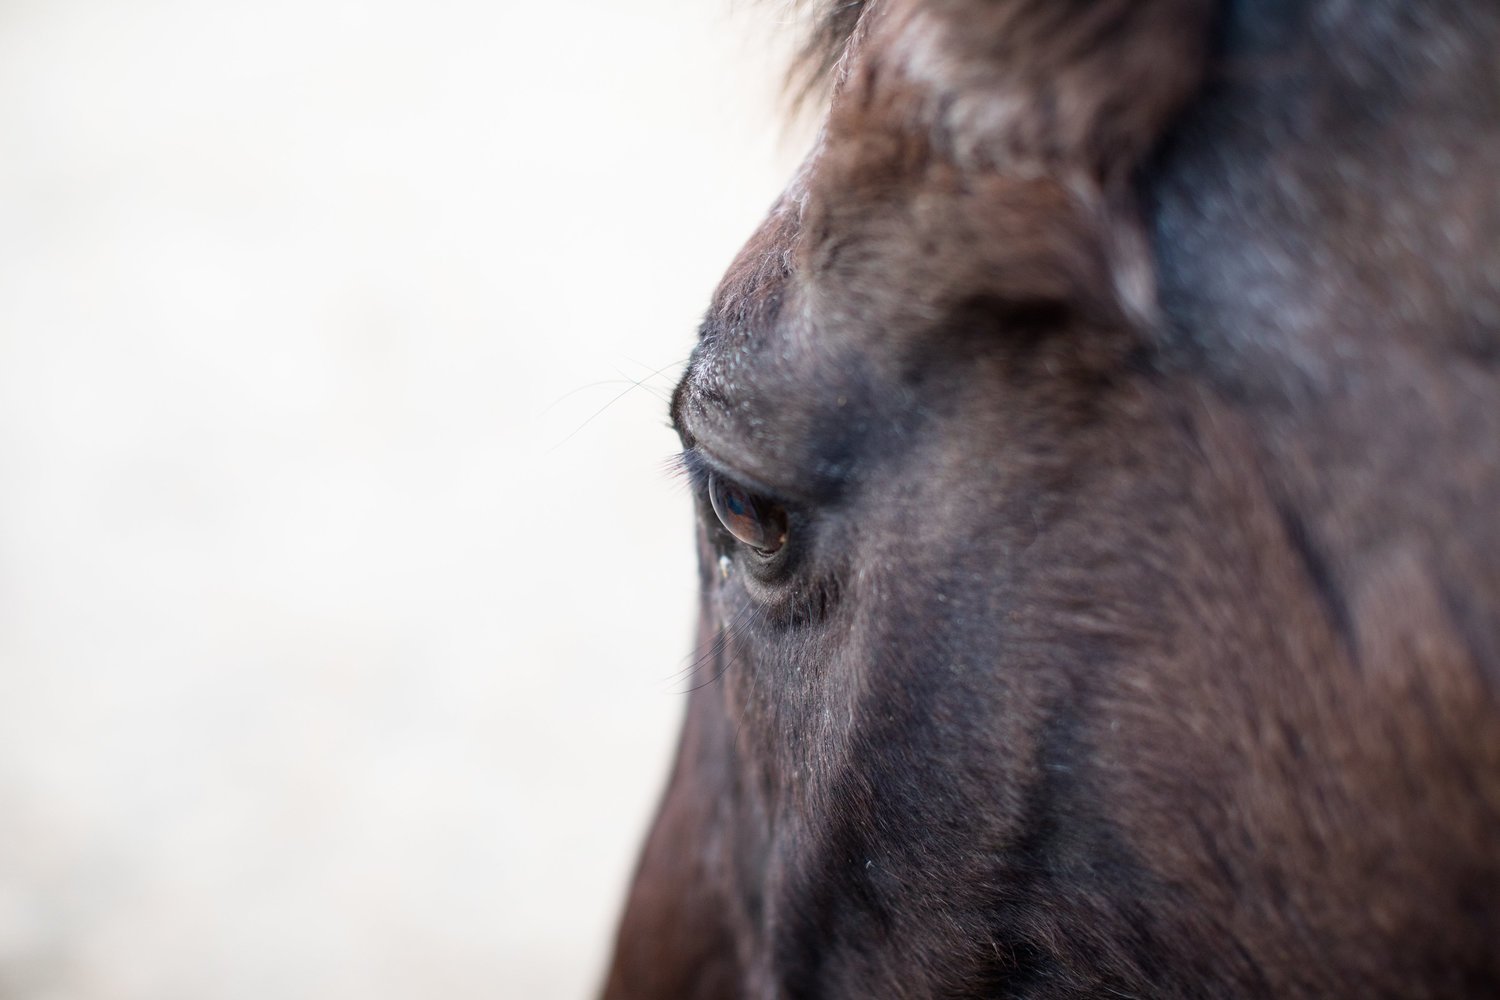 Close up of the eye of a dark colored horse